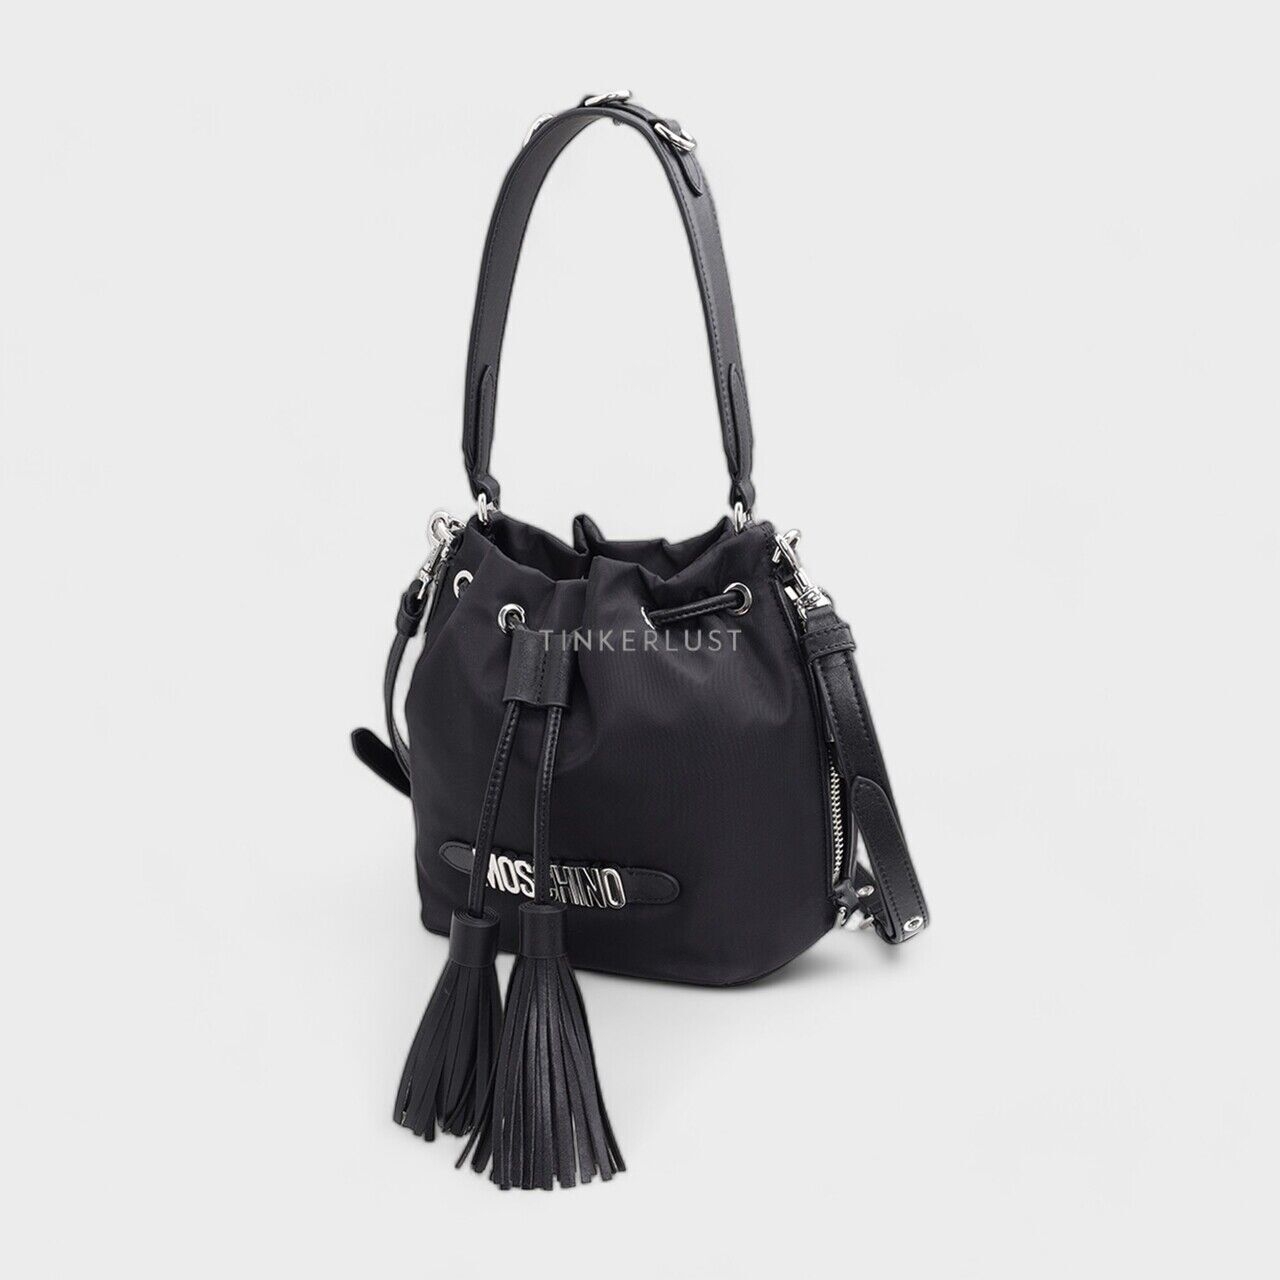 Moschino Mini Lettering Logo In Black SHW with Tassels Bucket Bag